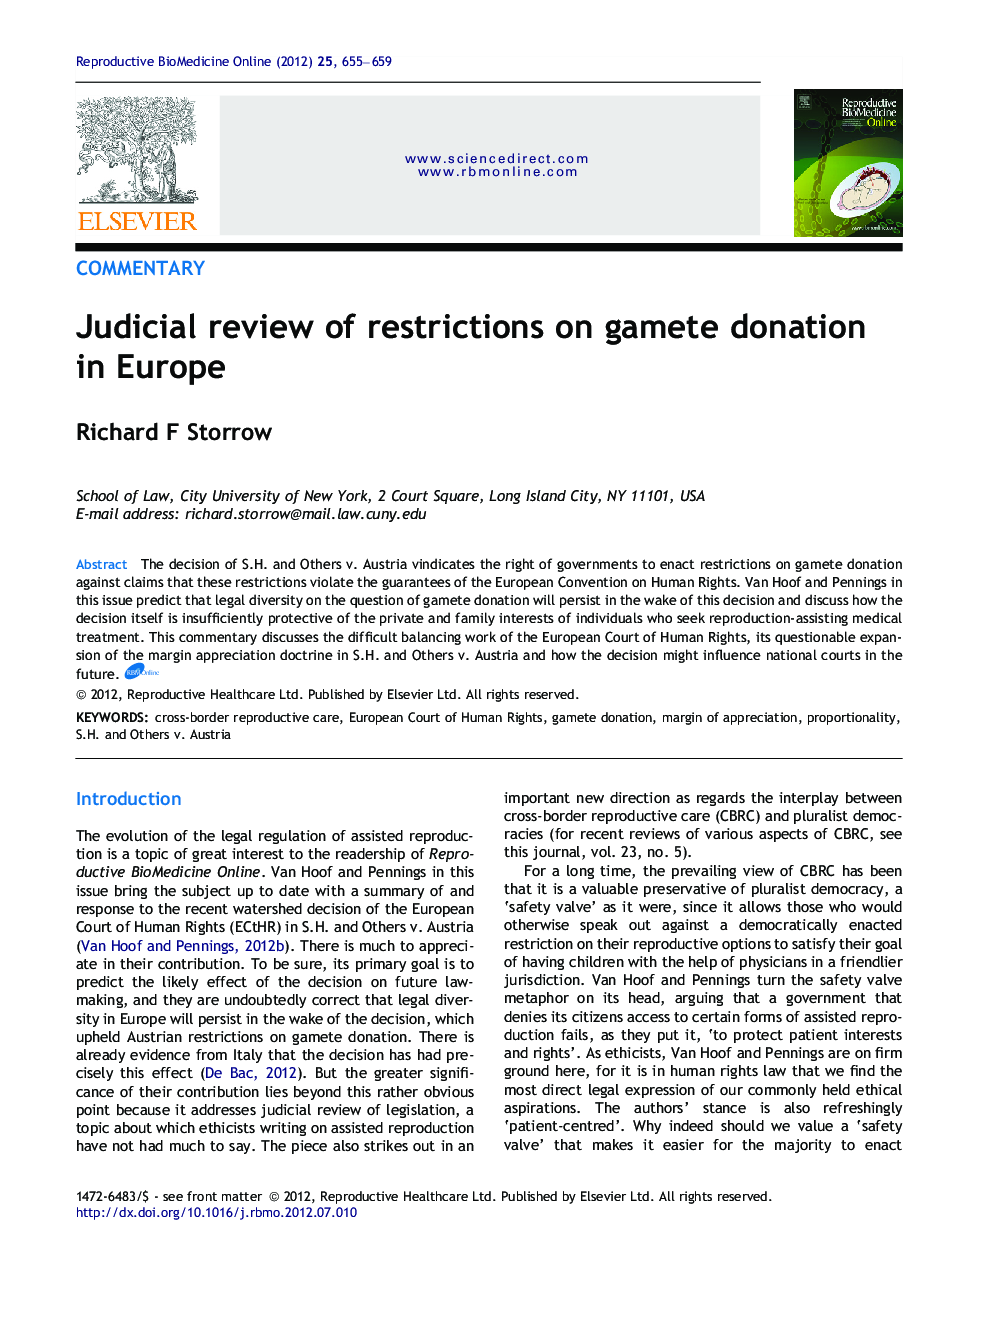 Judicial review of restrictions on gamete donation in Europe